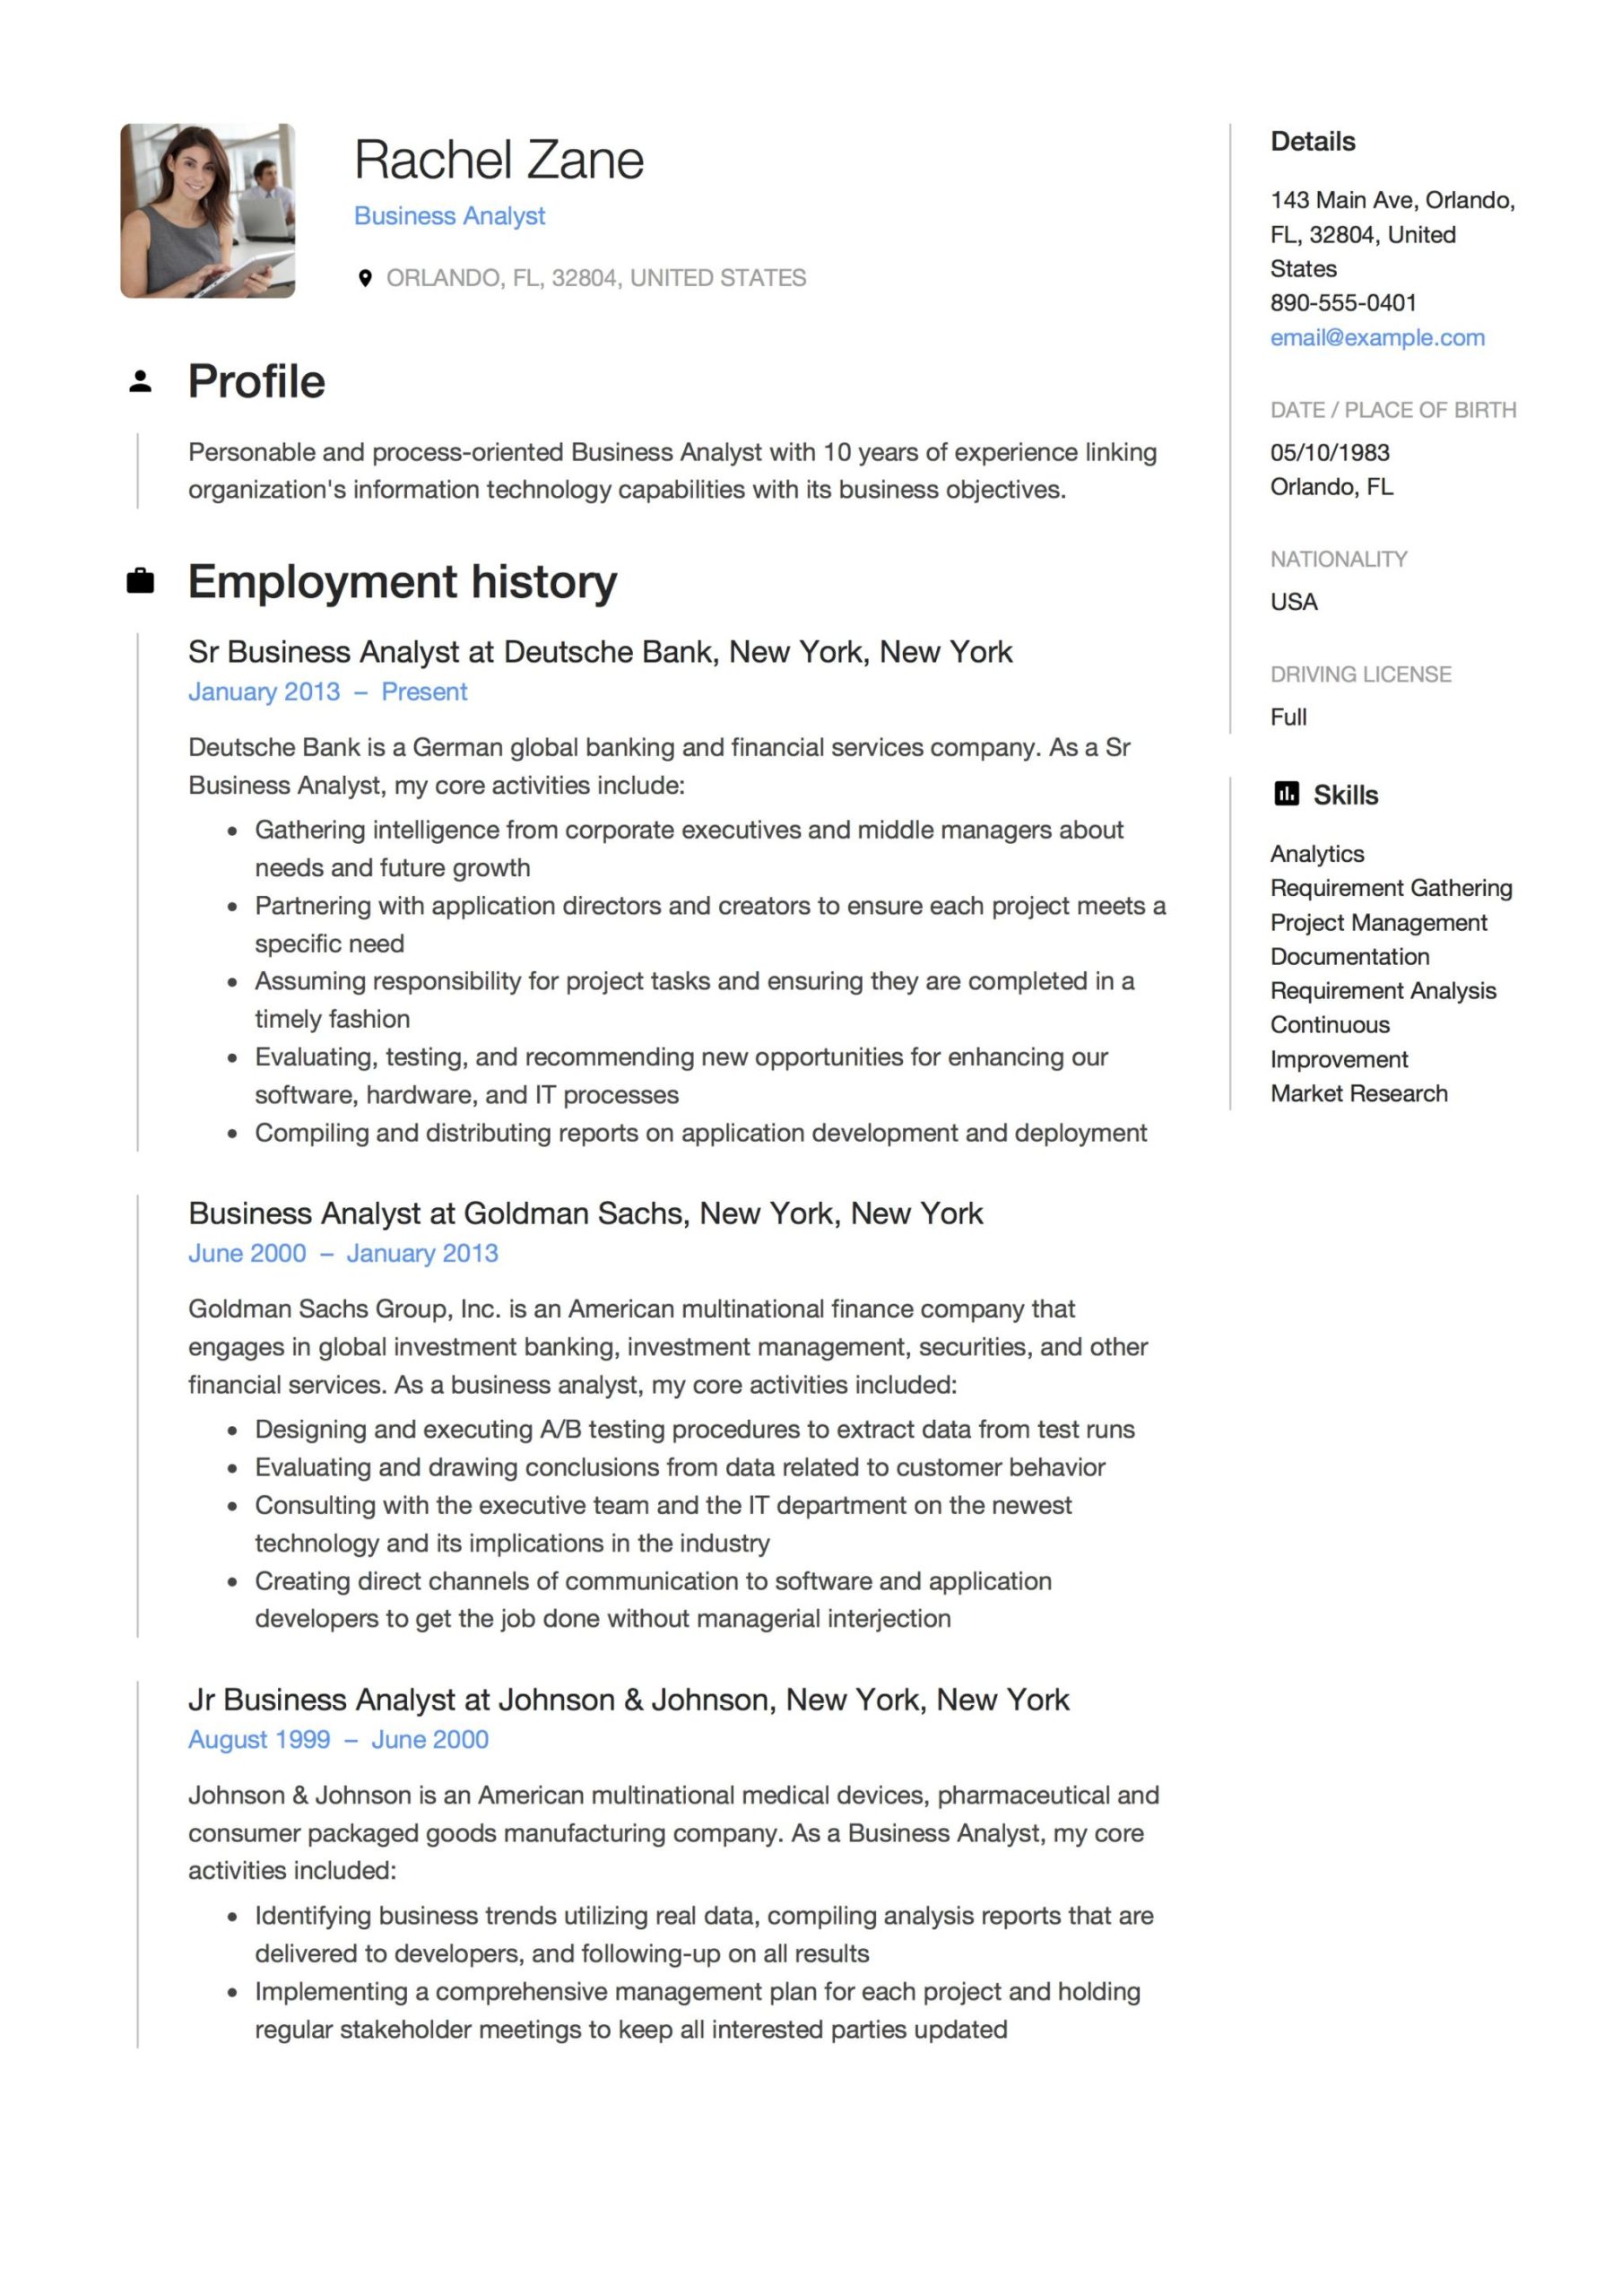 Resume Summary Samples for Business Analyst Business Analyst Resume Examples & Writing Guide 2022